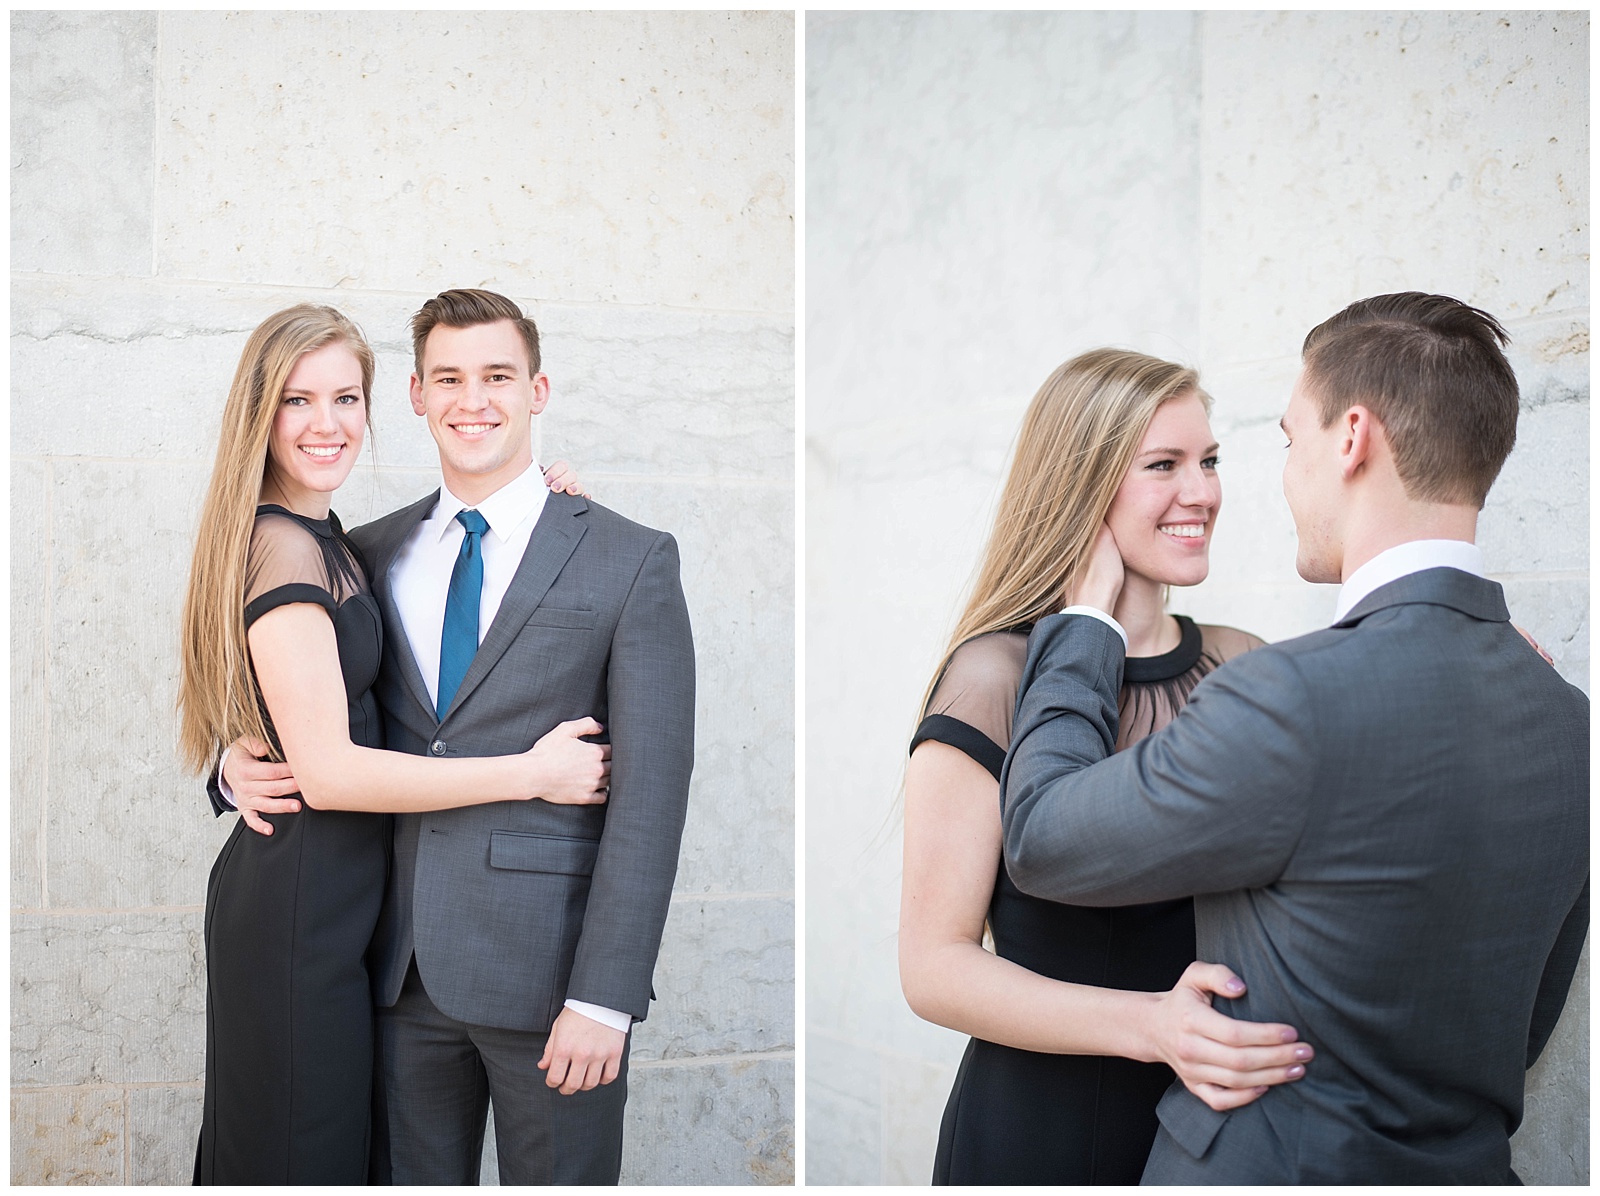 Caitlin and Alex's Ohio State Engagement Session | Monica Brown Photography | monicabrownphoto.com